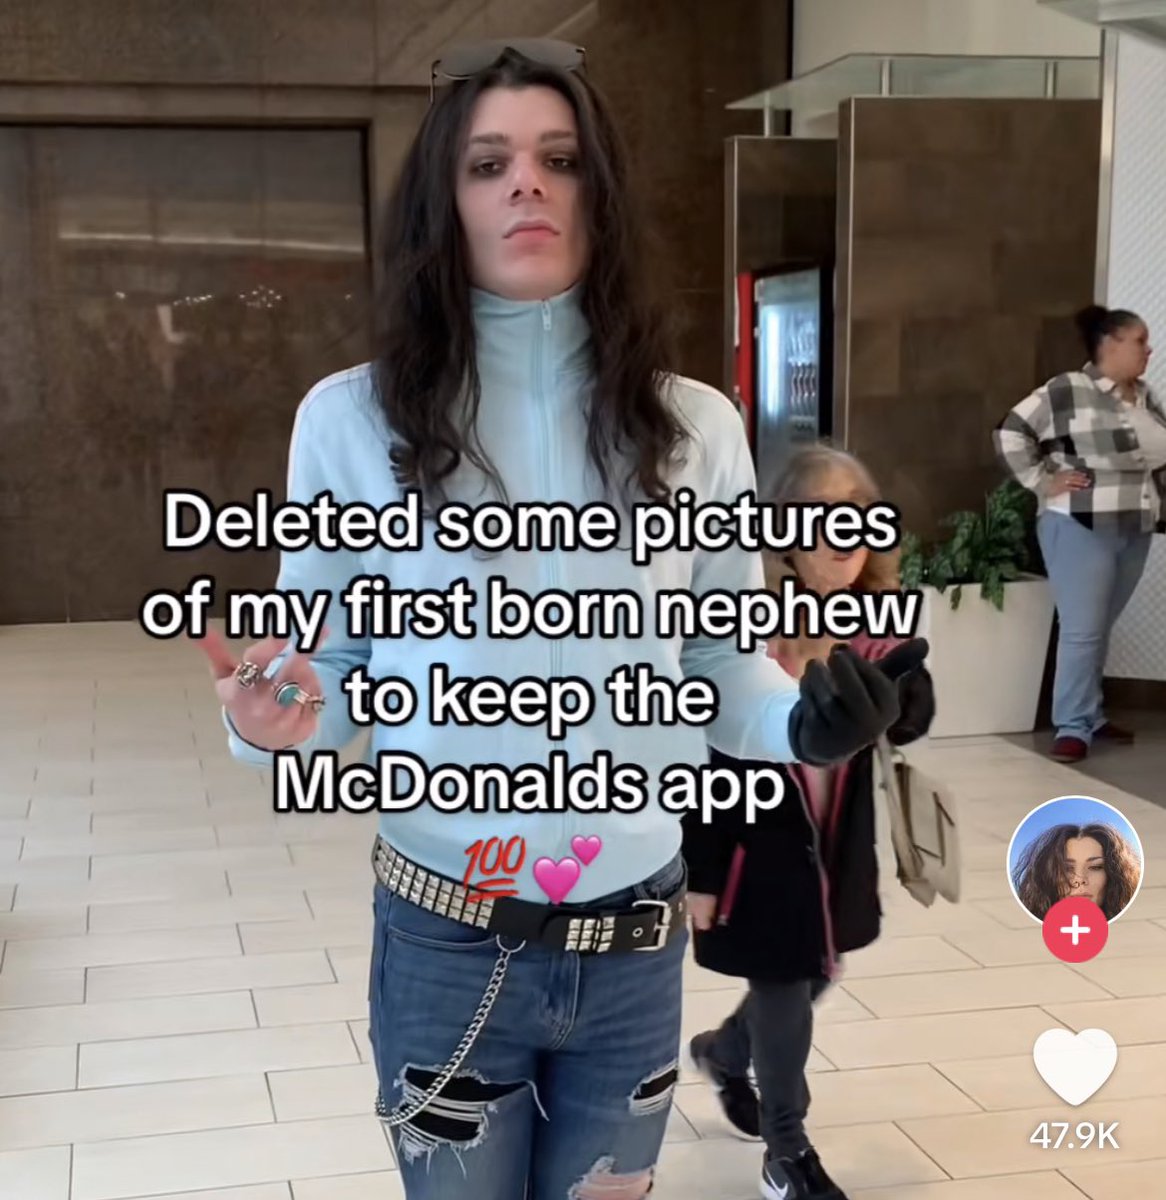 wild tiktok screenshots - shoulder - Deleted some pictures of my first born nephew to keep the McDonalds app 100